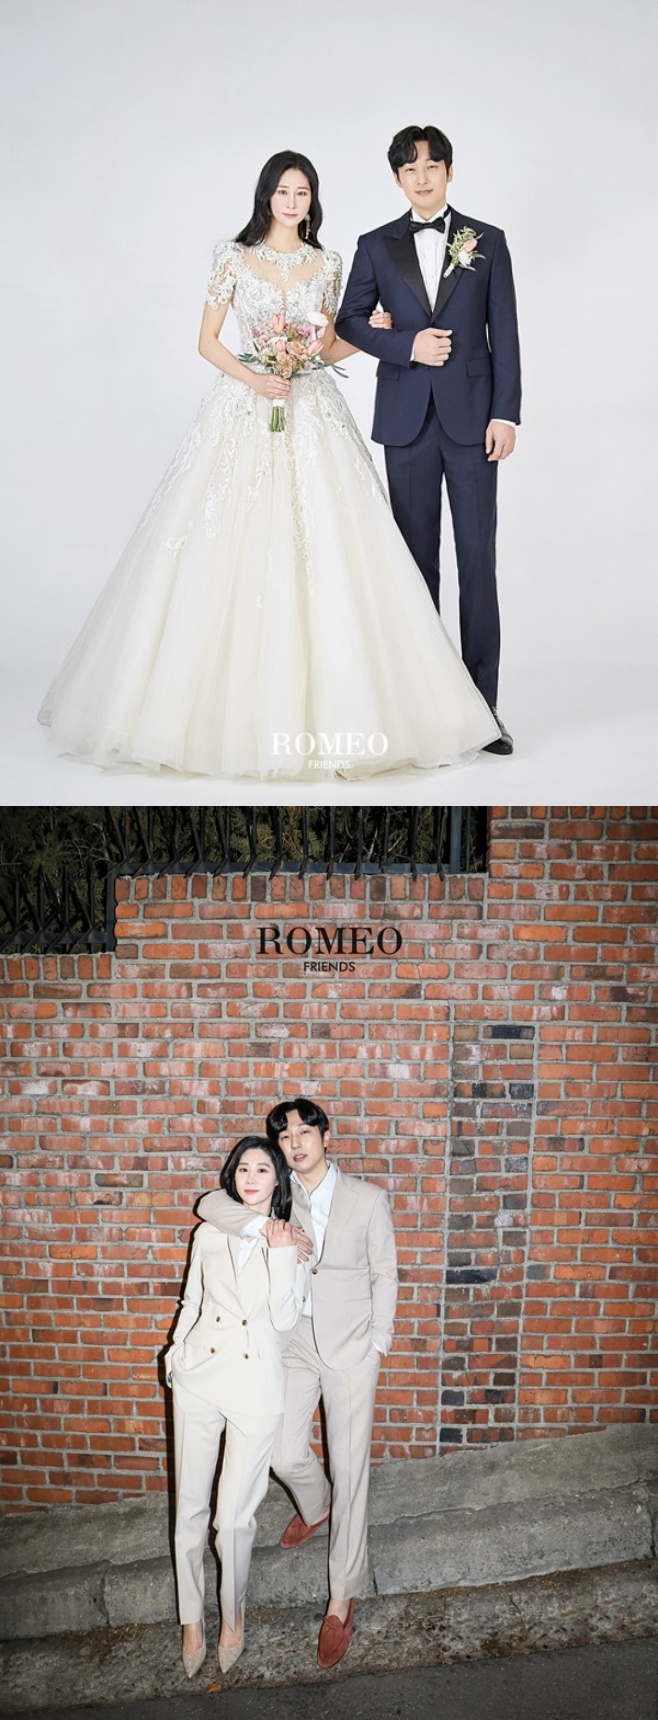 Actor Lee Seung-hyo marries sister of Jung Tae-wooLee Seung-hyos agency Happy Merid Company said on March 12, Lee Seung-hyo will marry her lover, who is four years younger, on March 1st.The wedding pictorials released along with this included Lee Seung-hyo, the beautiful chemie of the bride-to-be; the bride-to-be was known as the sister of actor Jung Tae-woo.In fact, Lee Seung-hyo is a close friend of Jung Tae-woo, who first made a connection in the 2006 drama Daejo Young.After interacting with his family for a long time, he became close to his first sister Jung Tae-woo, and he started his devotion from October last year and made a marriage of a couple.No officiating is the greetings given by former UN Secretary General Ban Ki-moon, the hometown friend of Lee Seung-hyos father.Lee Seung-hyo said, Although the love life was short, I think the gag code (with the reserve bride) fits well and I can get along like Friend, he said. I want to be a husband like Friend.Lee Seung-hyo made his debut in 2006 and won the MBC Acting Award for Best New Man Award in MBC Sundeok Queen as a gallery Alchonrang.Since then, he has appeared in Jeonwoo, Full House 2, Kwon Ryong I Narsa, and New Entrepreneur.